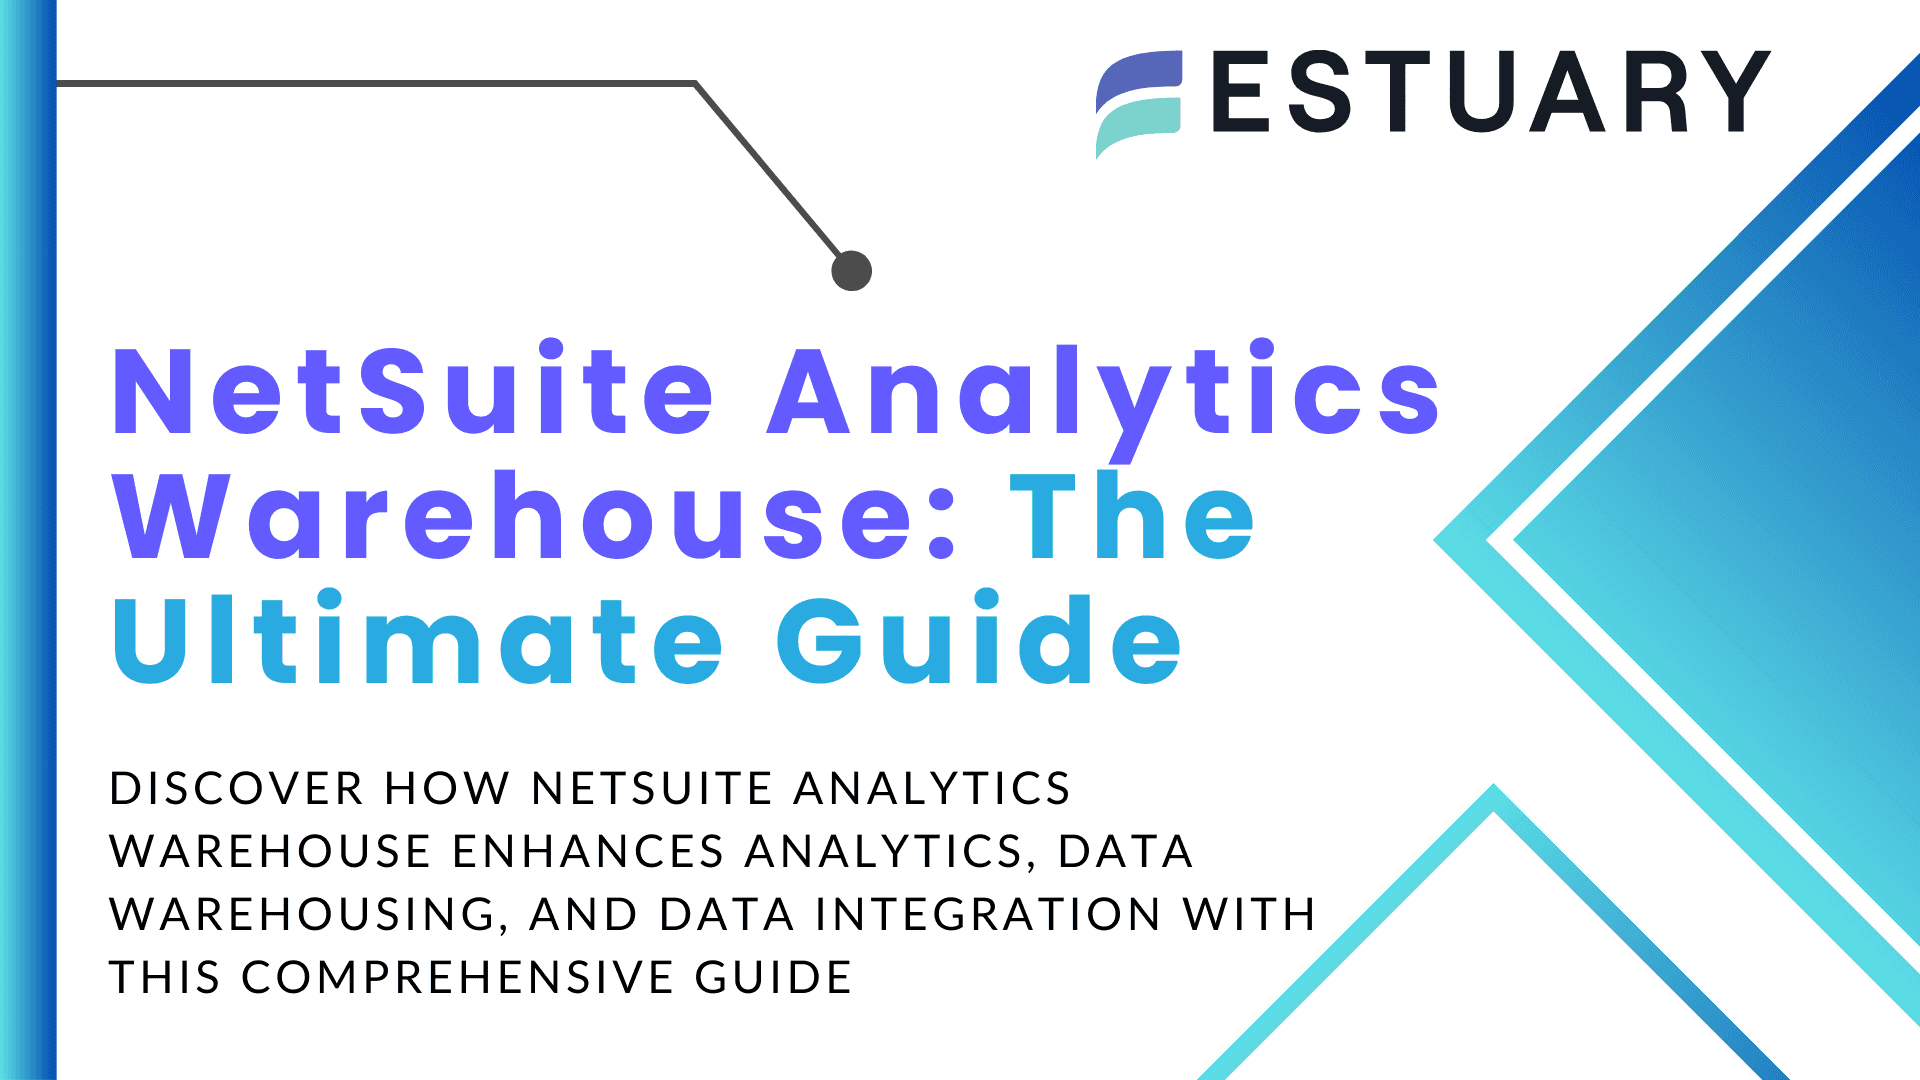 NetSuite Analytics Warehouse: The Ultimate Guide